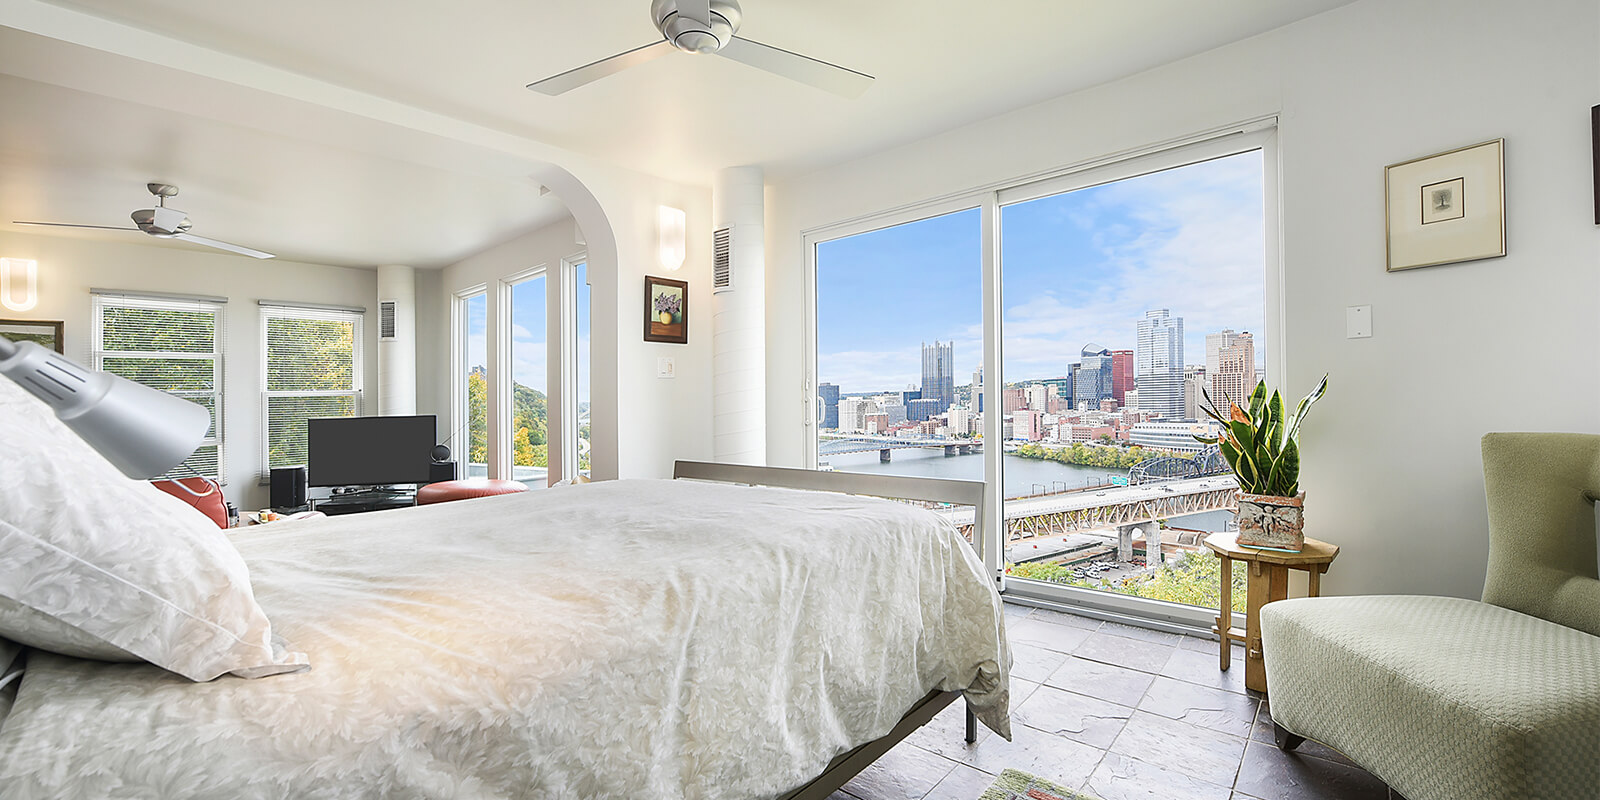 master's bedroom with city view of Pittsburgh